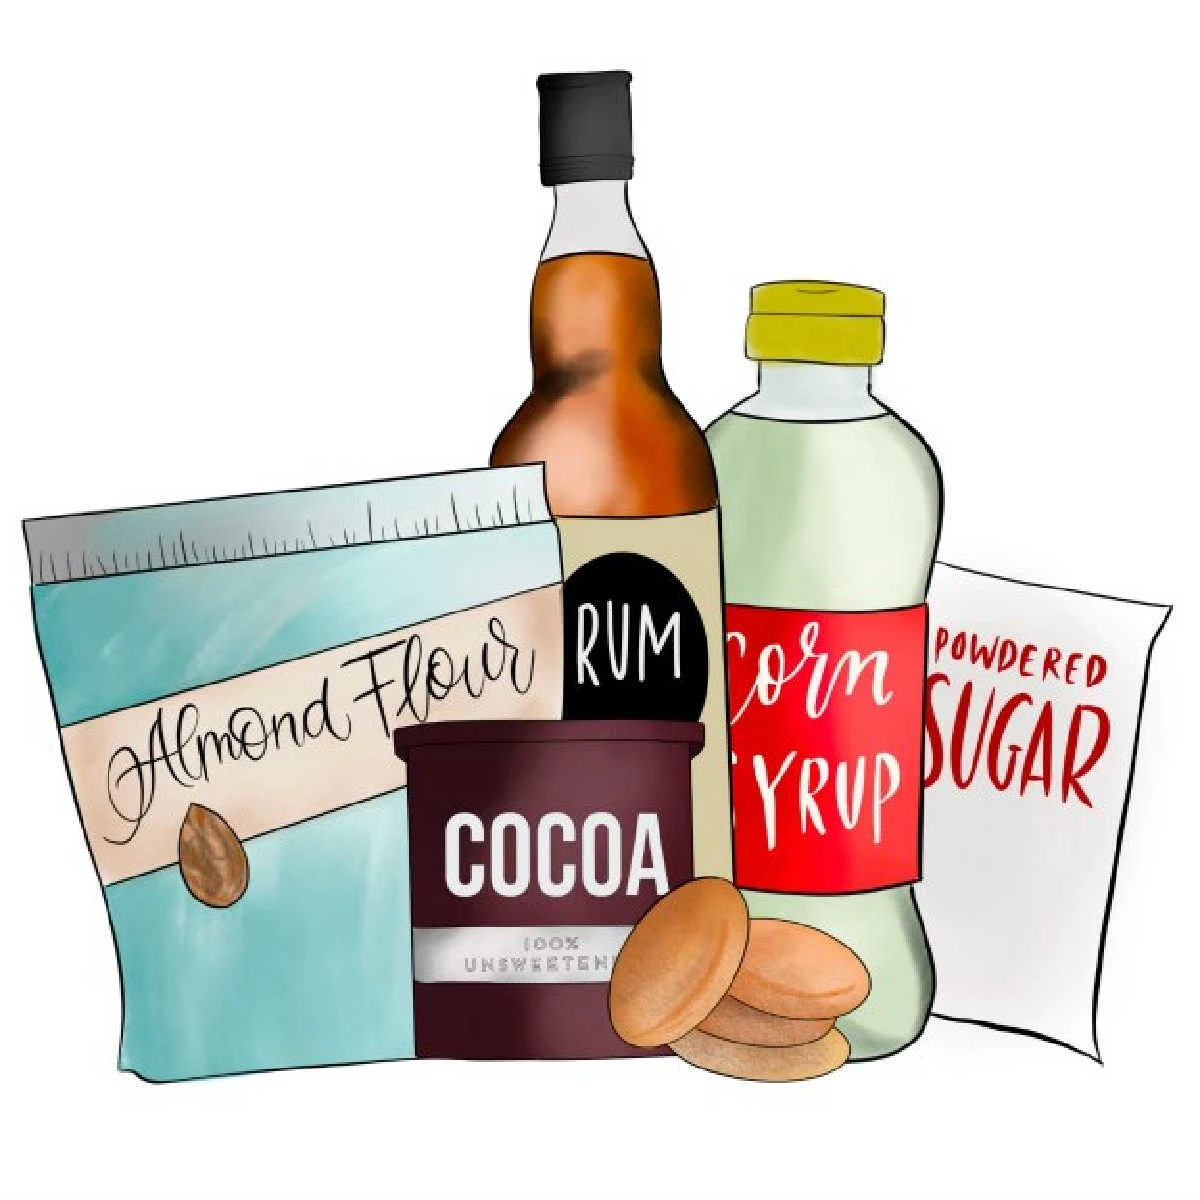 Digital illustration of rum ball ingredients including unsweetened cocoa powder, corn syrup, powdered sugar, nilla wafers, almonds and rum.